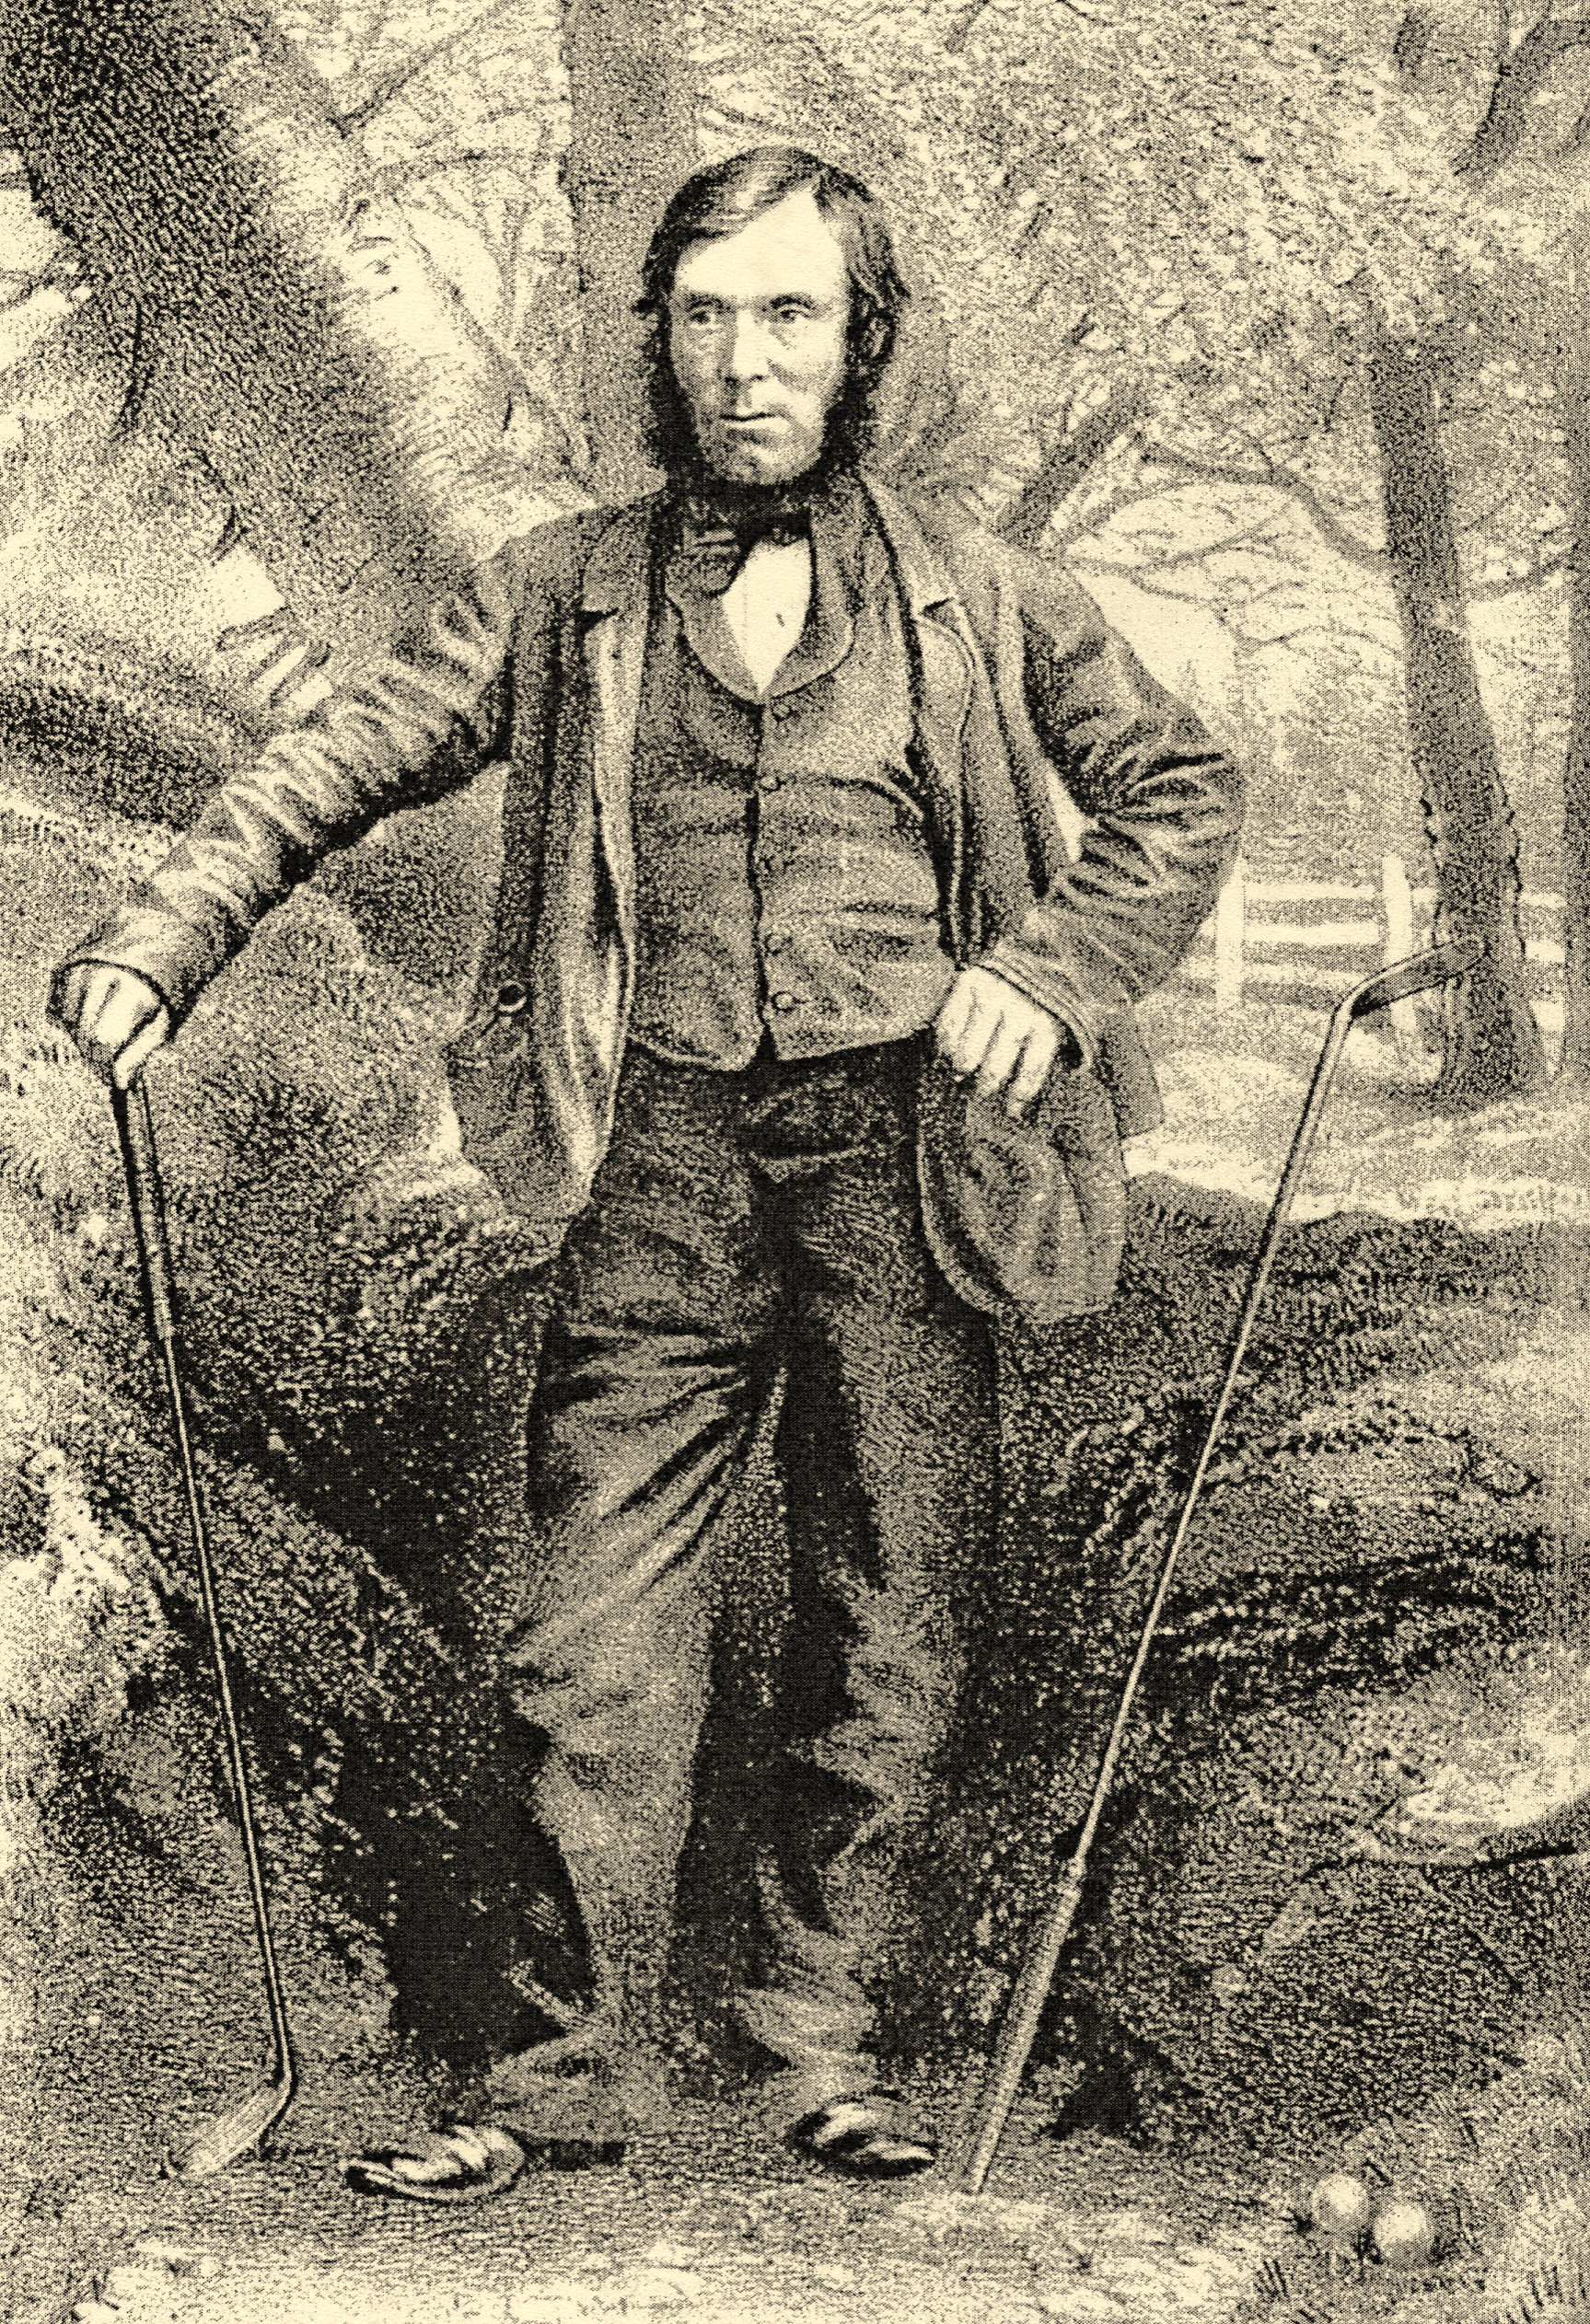 A lithograph of Alan Robertson, golf professional. Considered the Grandfather of Modern Golf.